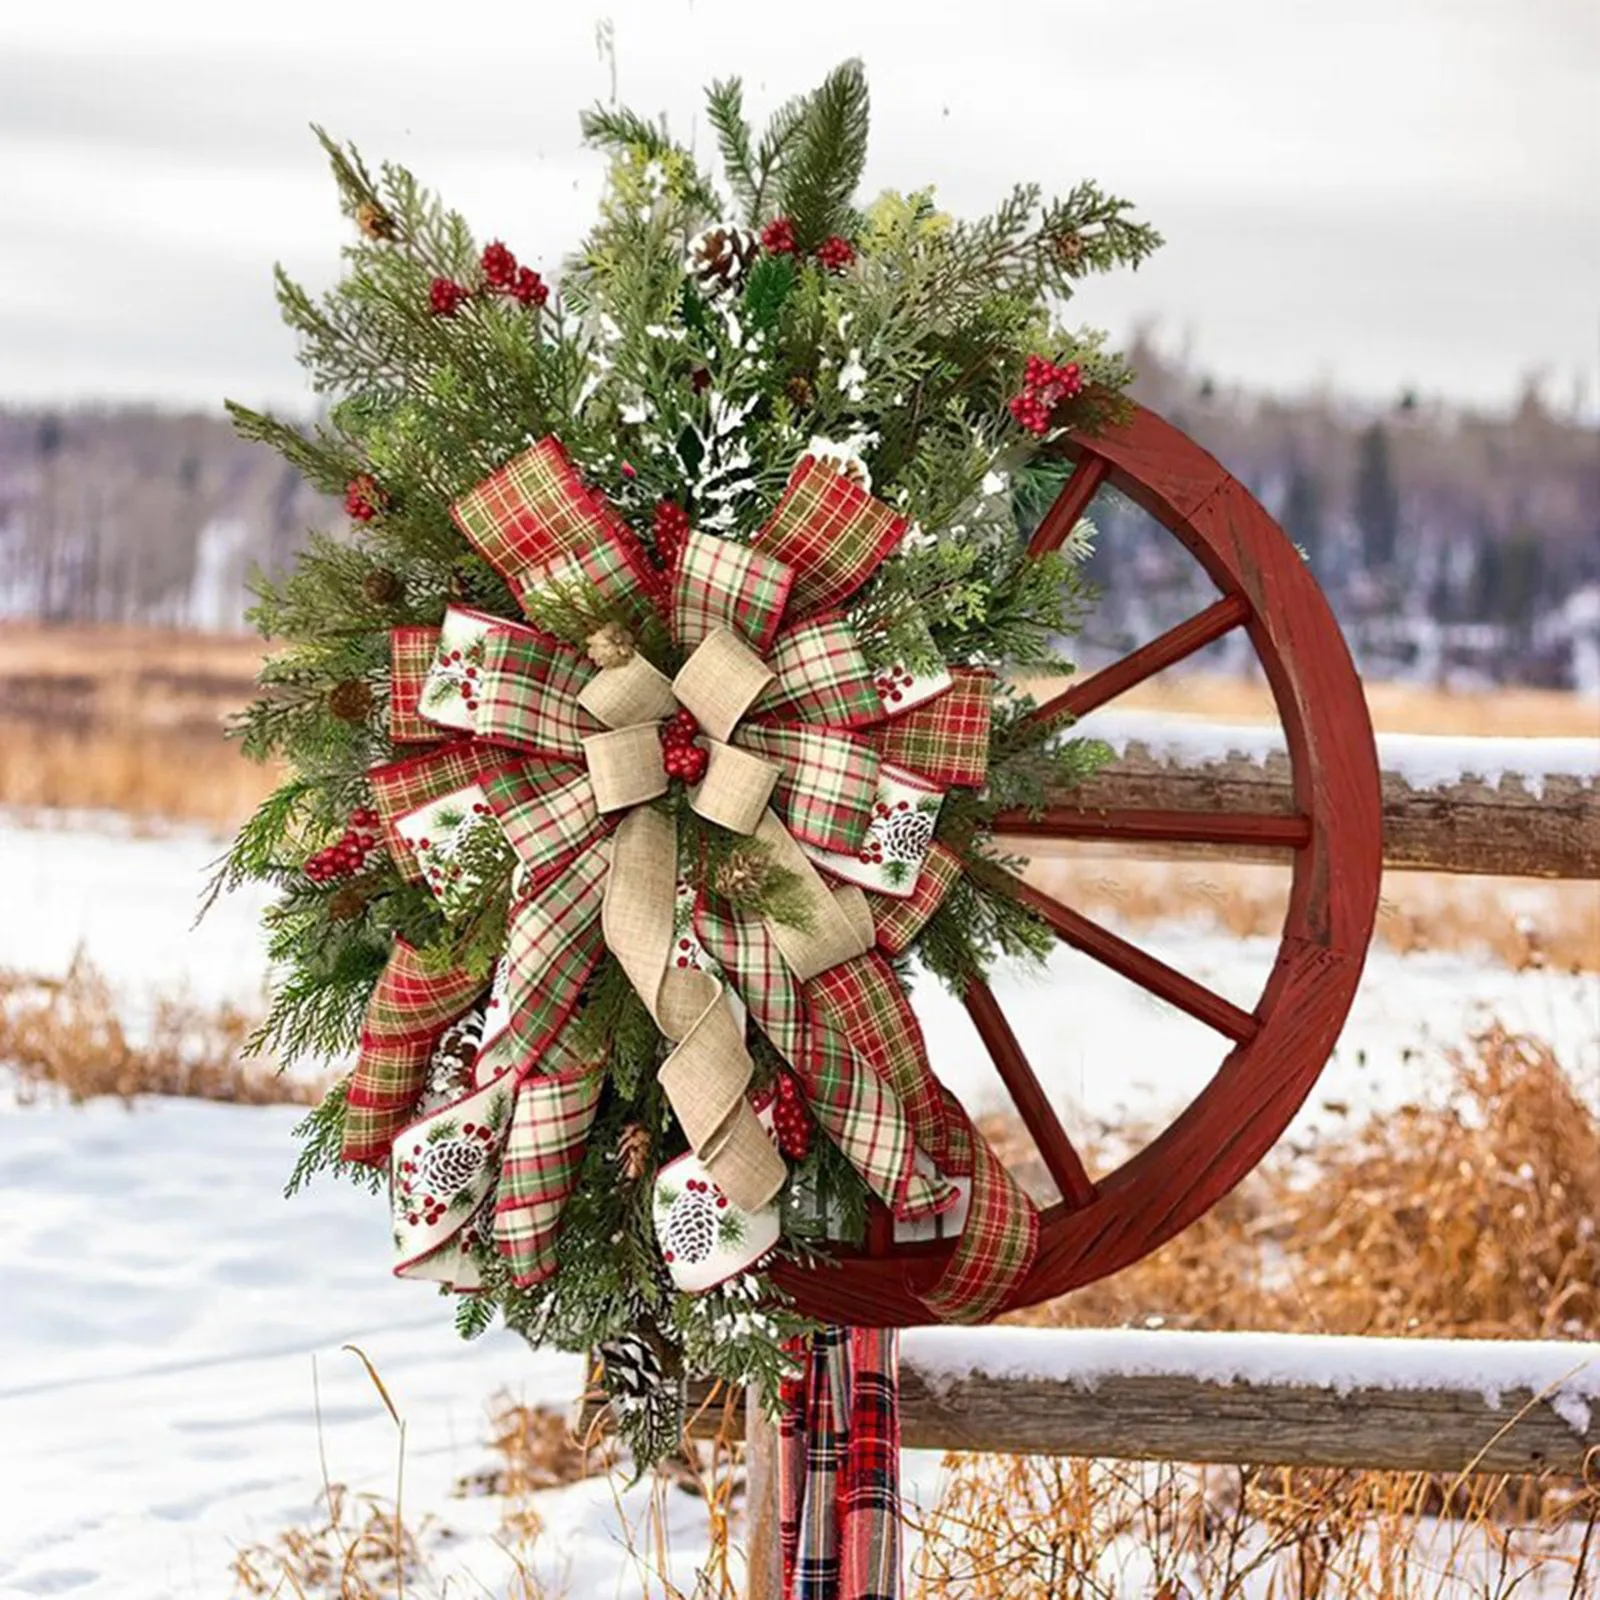 Red Winter Wreath-Farmhouse Wagon Wheel Red Wagon Wheel Wreath Vintage Farmhouse Wreath Christmas Wreath for Front Door Holiday Wreath Winter Decorative Wreath